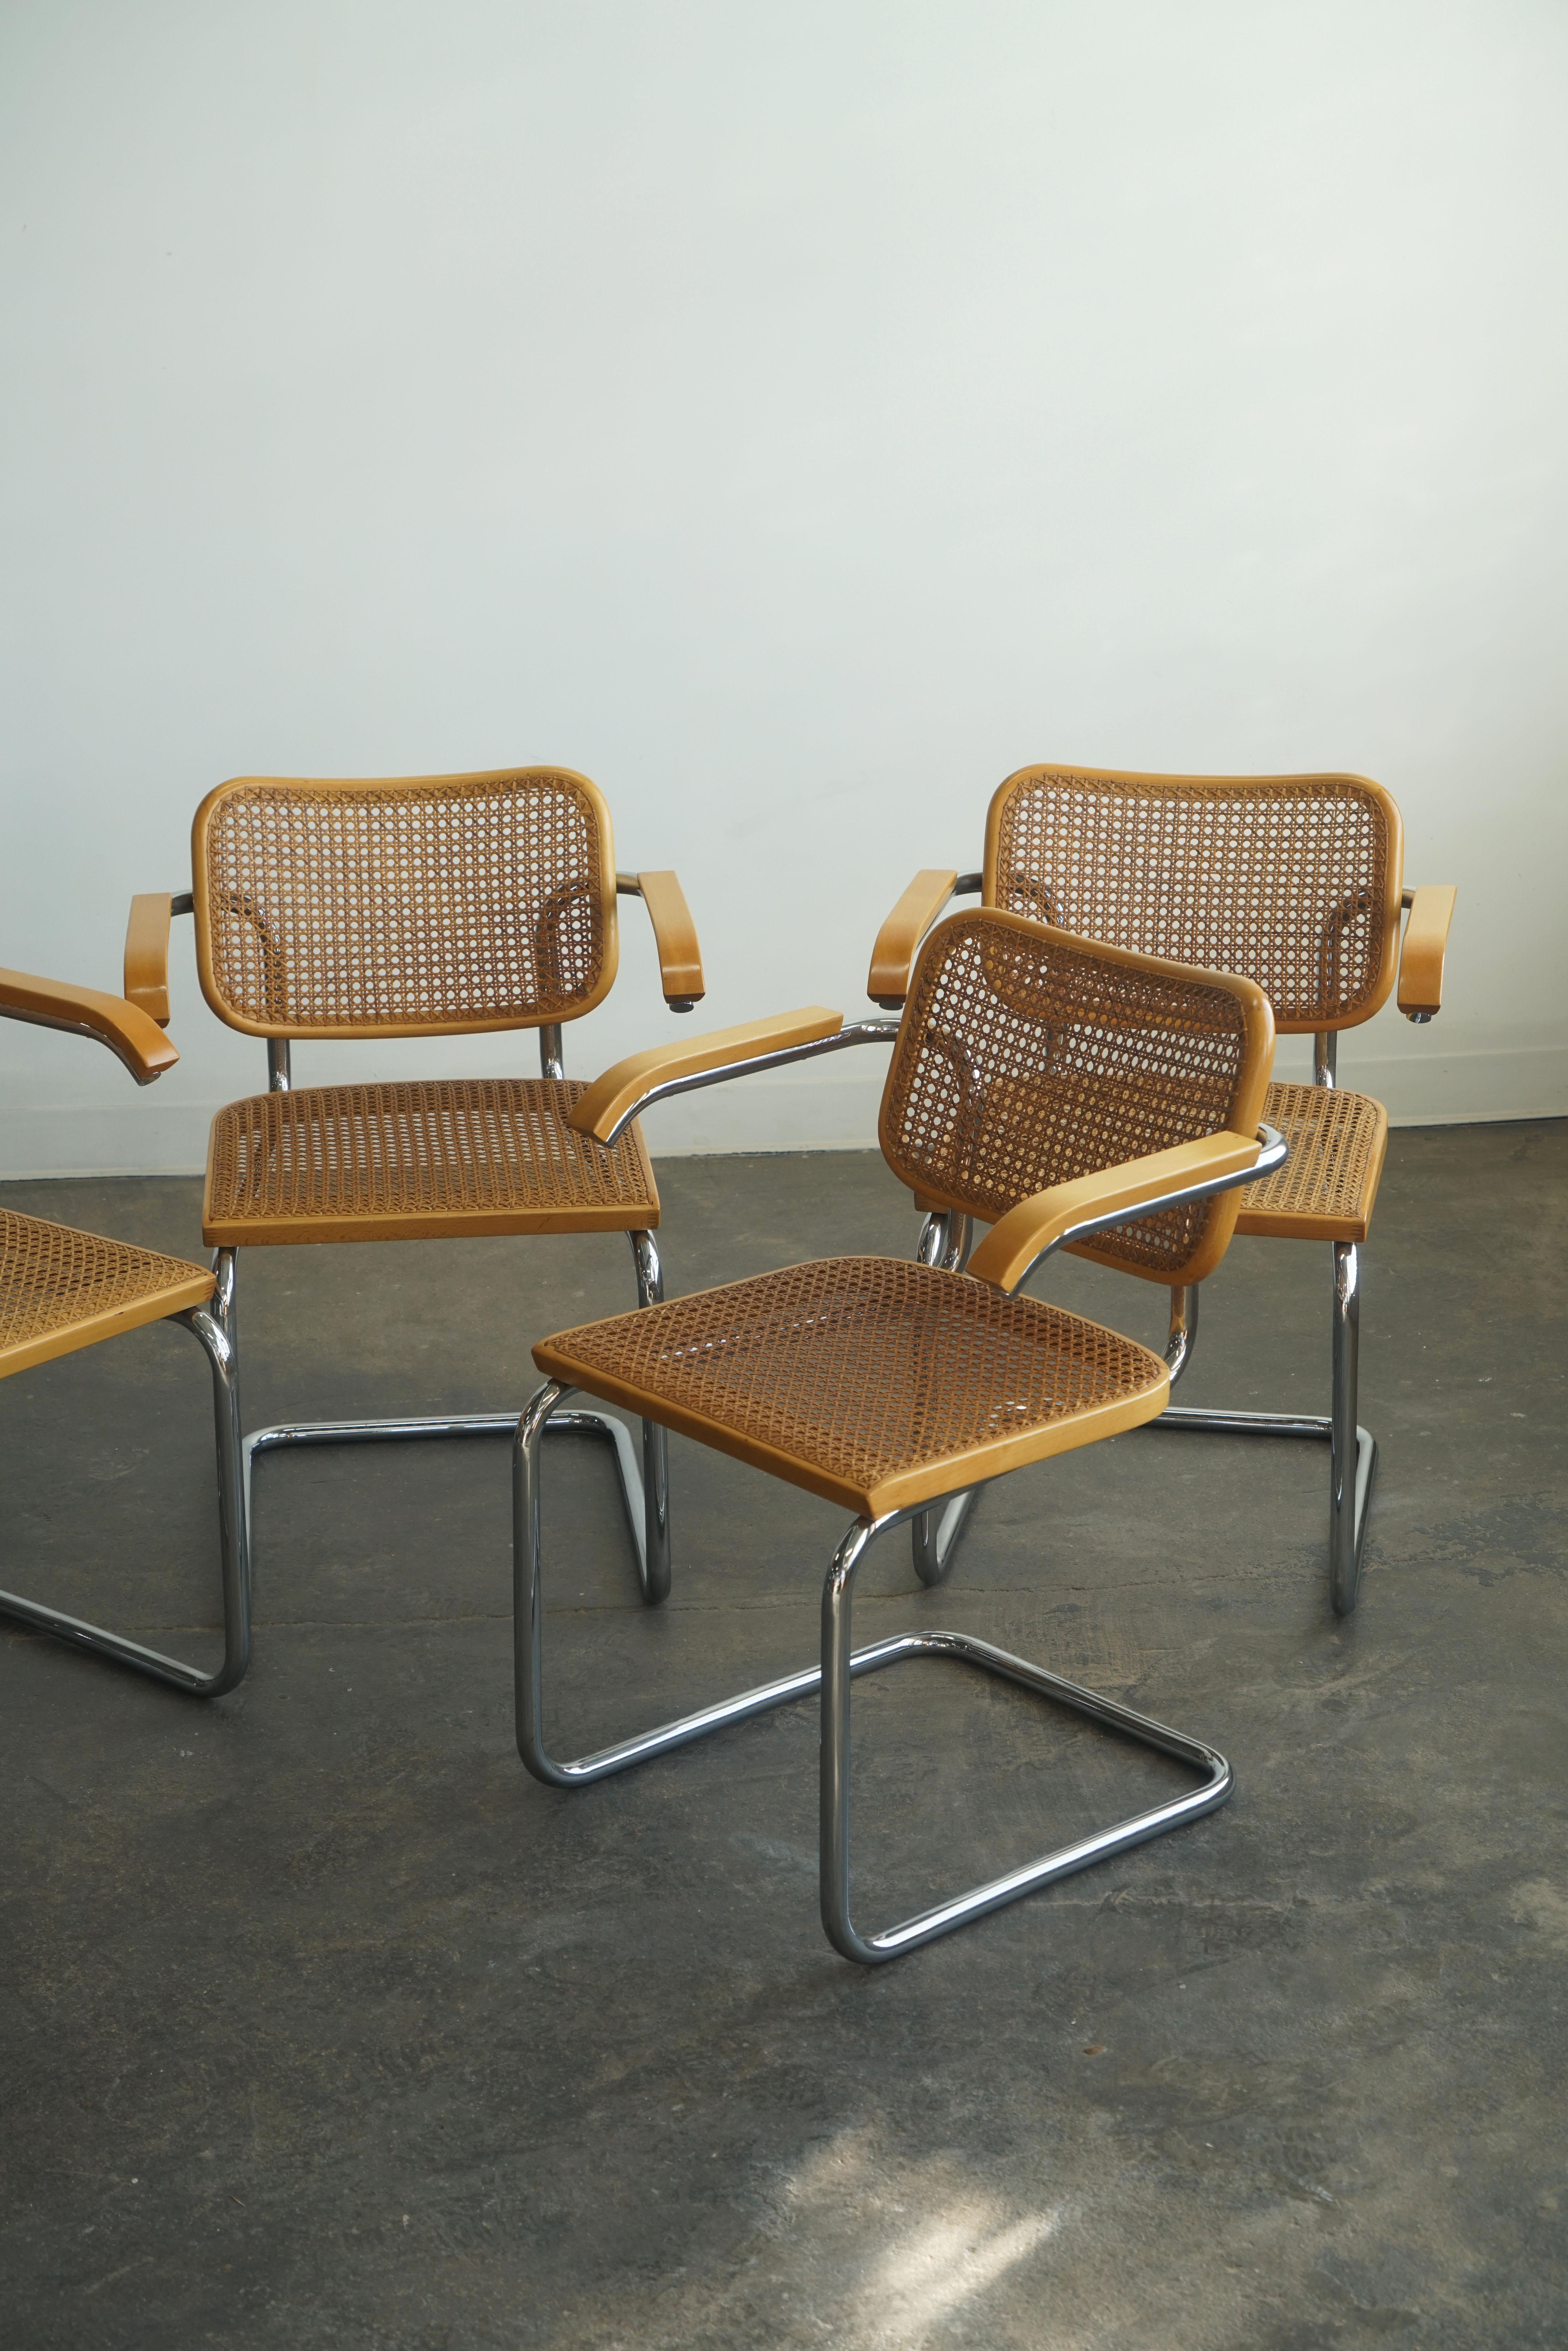 Bauhaus Set of 4 1960's Marcel Breuer Cesca chairs with arms, Stendig labels For Sale